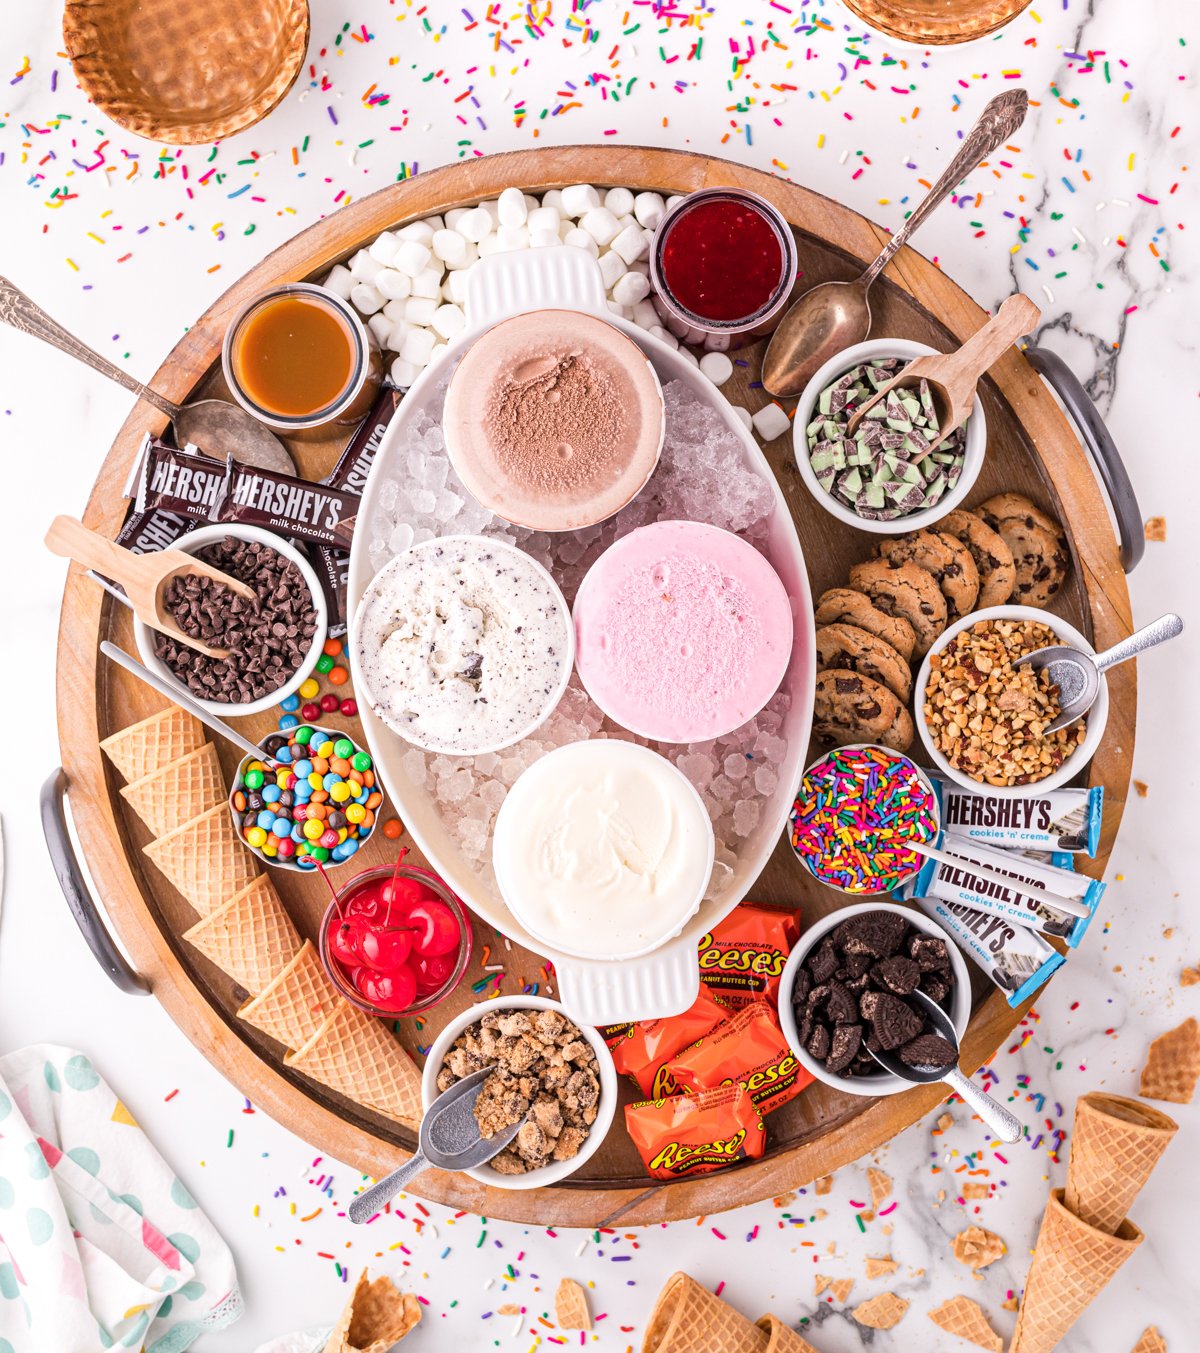 An Ice Cream Dinner Party Is the Best Kind of Party